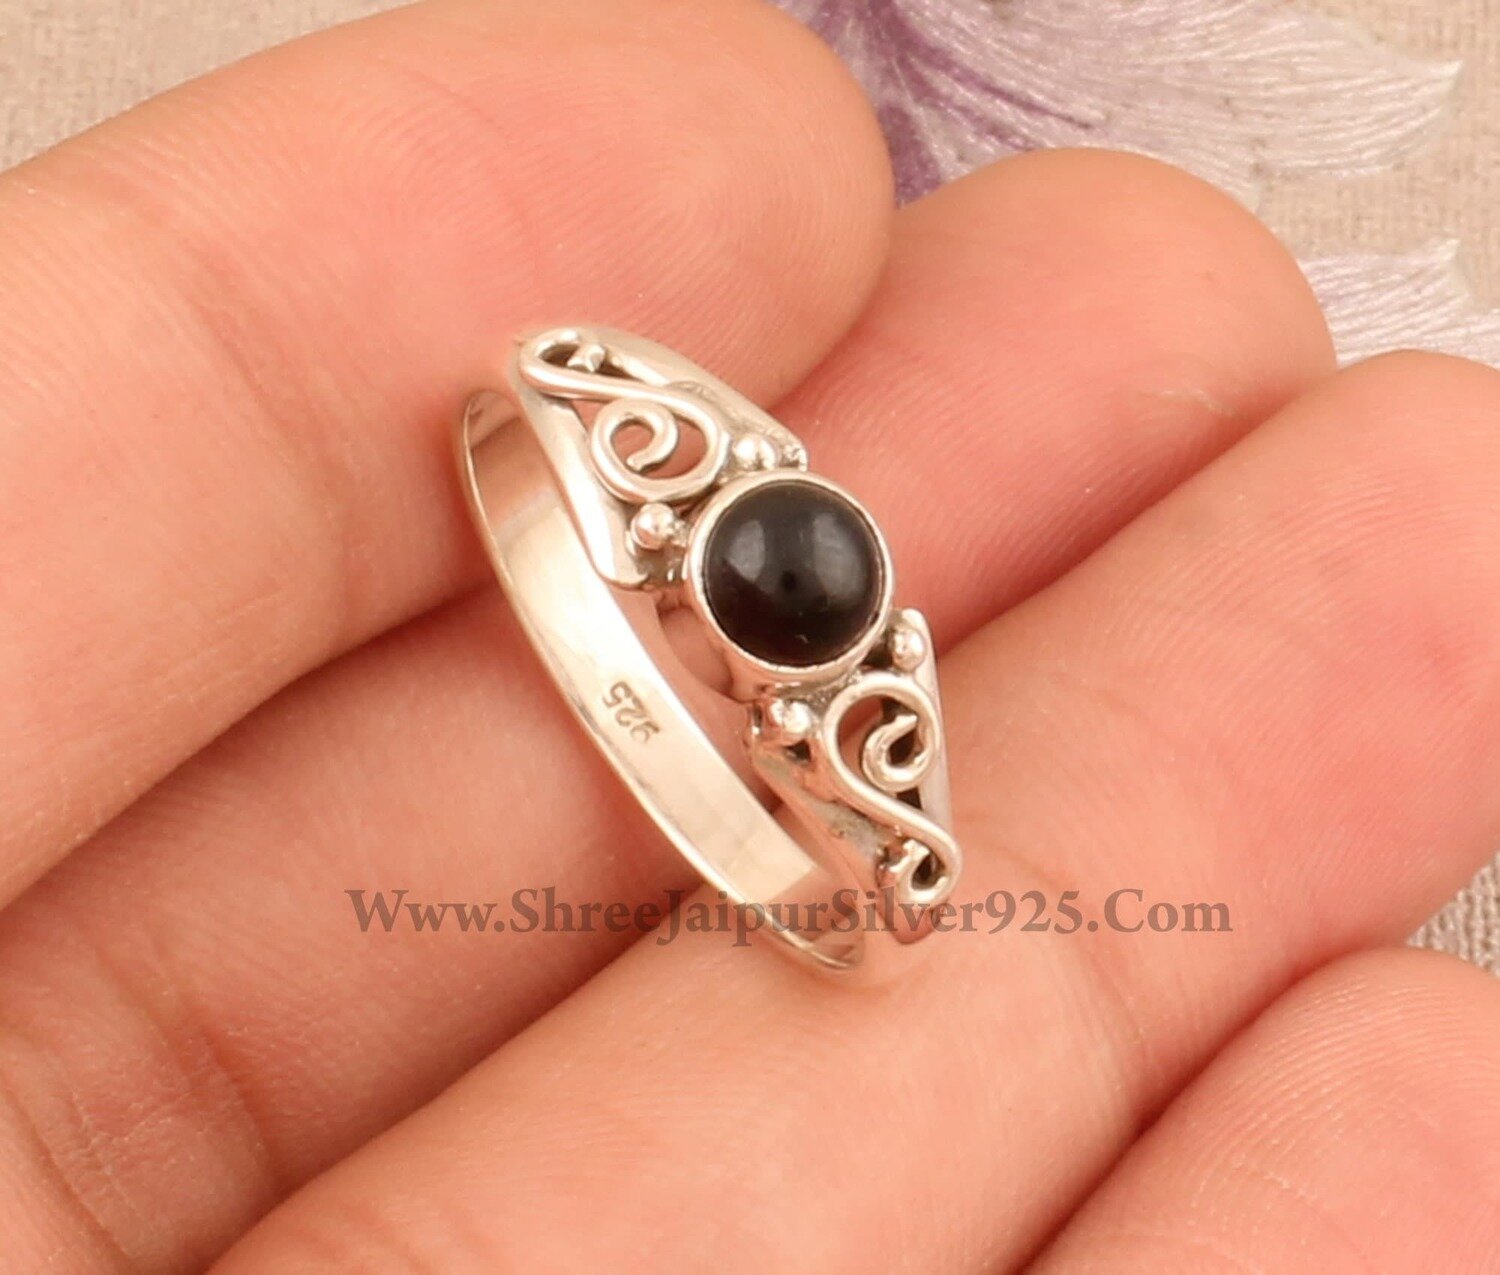 Round Black Onyx Tiny Stone Solid 925 Sterling Silver Ring For Women, Handmade Dainty Vintage Design Ring For Wedding Anniversary Gift Idea